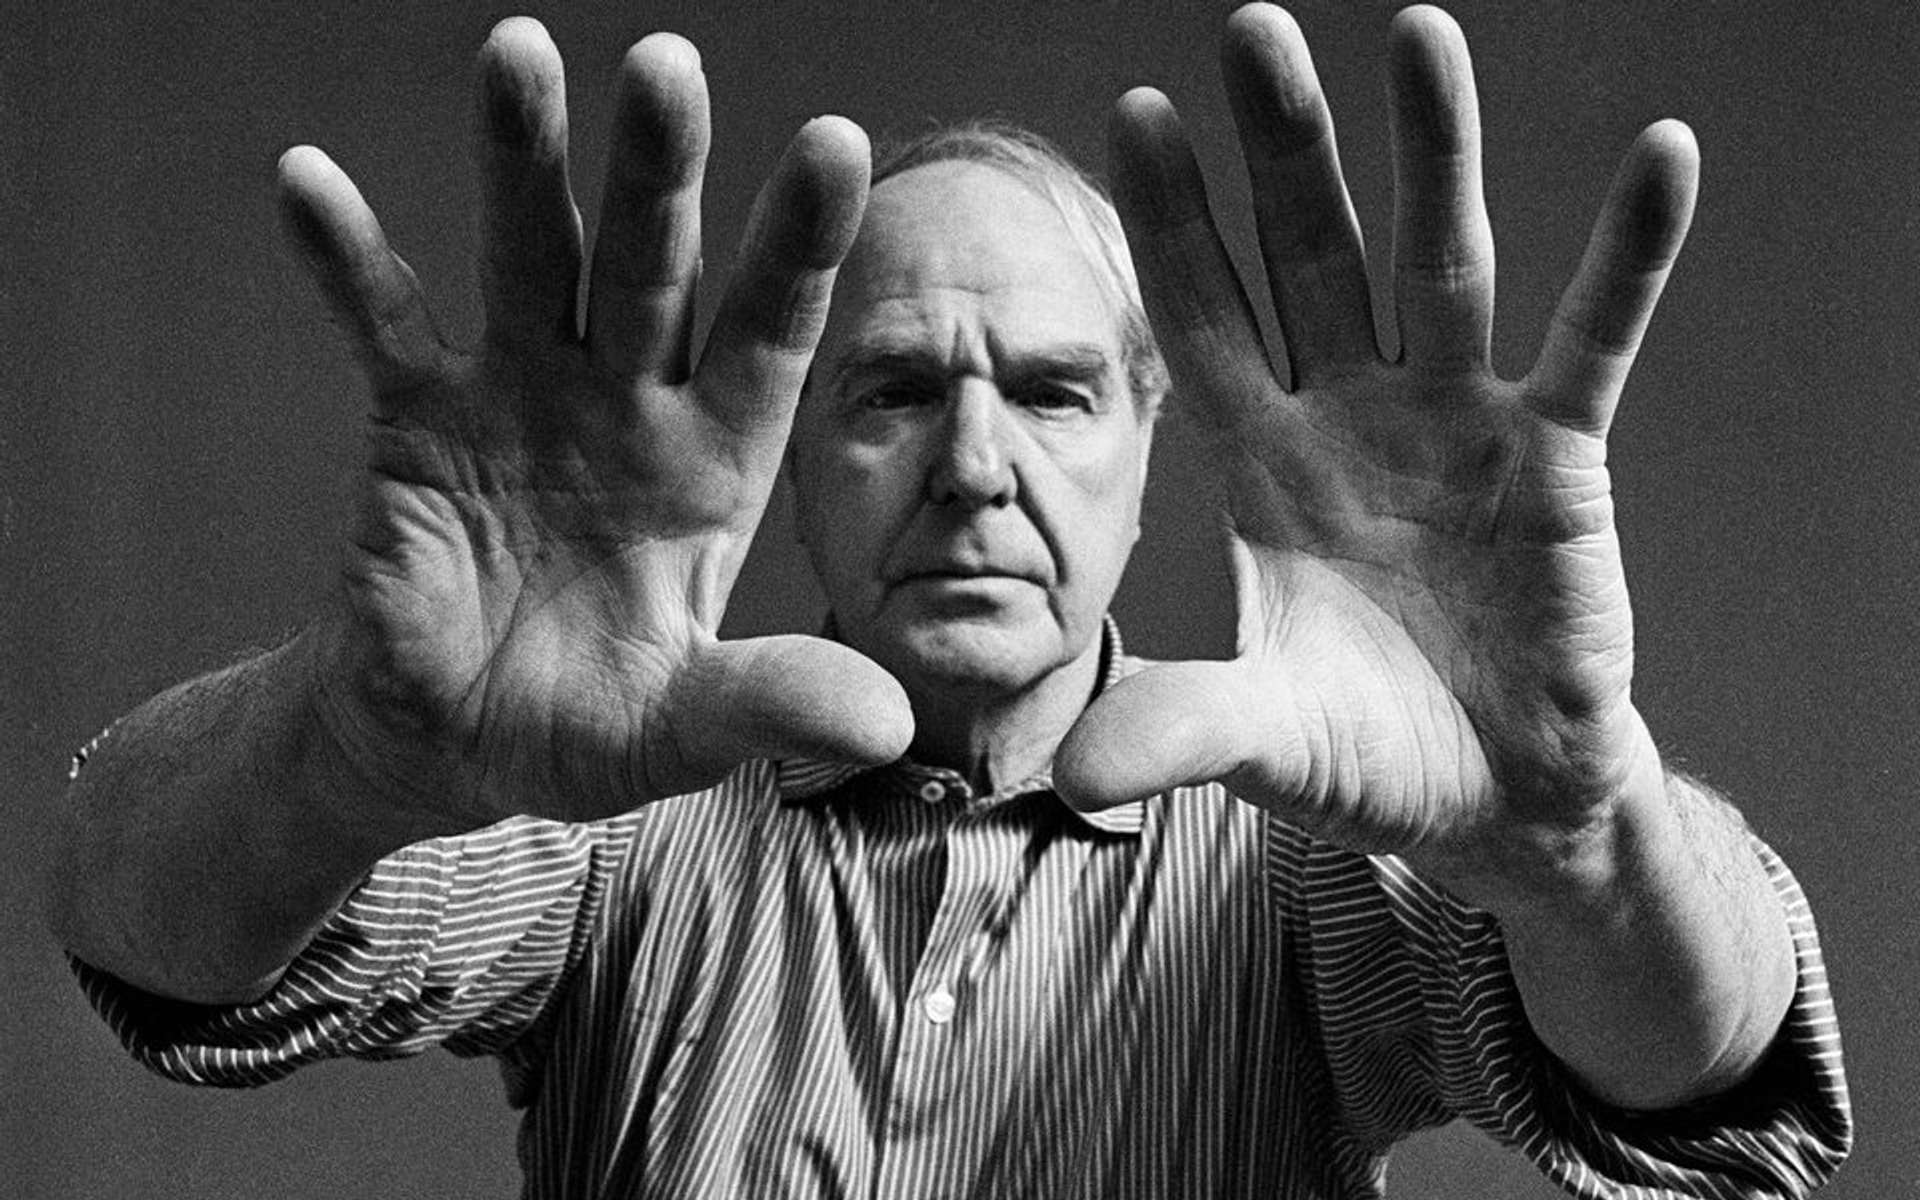 Black-and-white photograph of Henry Moore wearing a striped button-up shirt, with rolled-up sleeves. His hands, with fingers spread open, are positioned close to the camera lens, revealing the full frontal view of his palms.